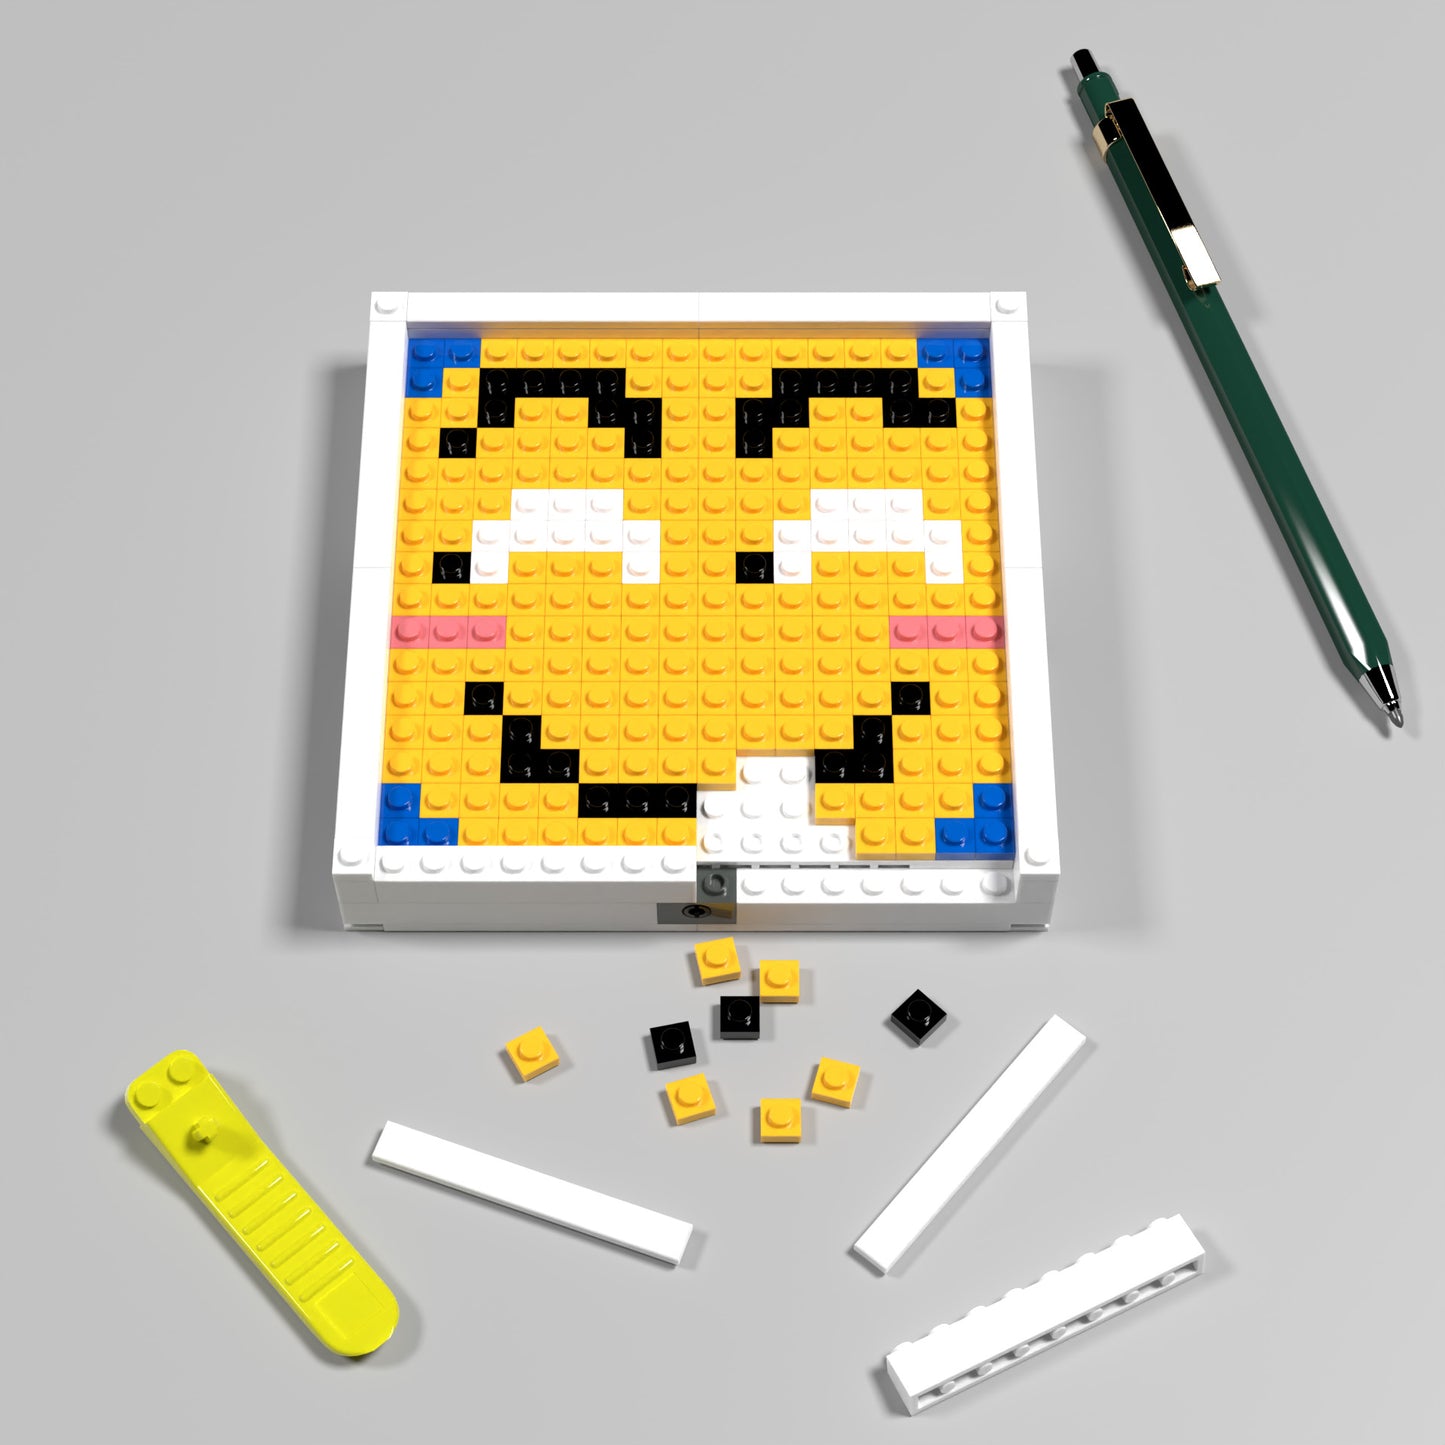 Pixel Art of Funny Face Compatible Lego Set - A Humorous Decoration to Lighten Up Your Mood